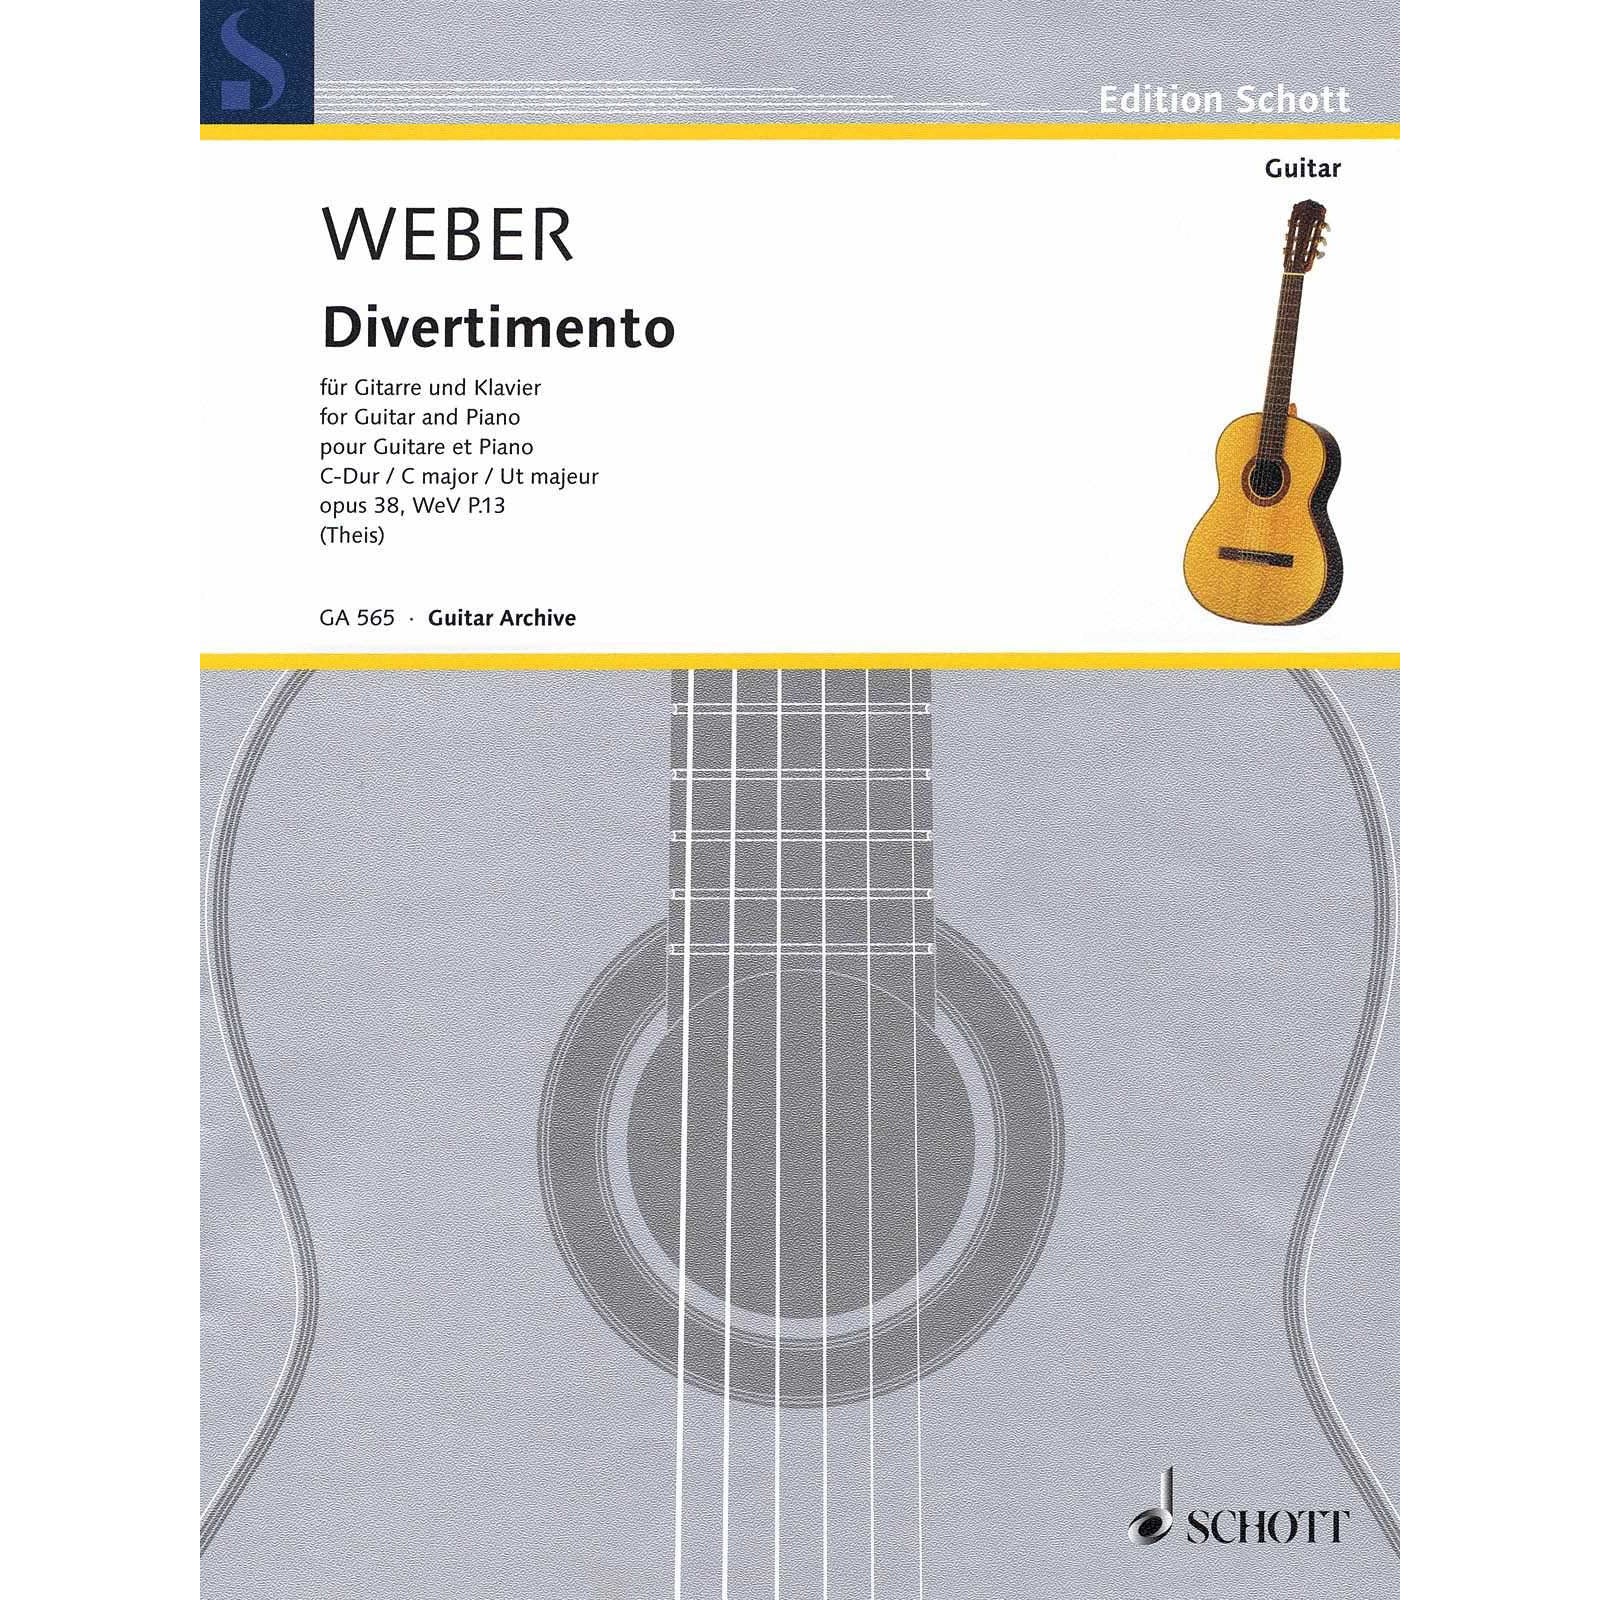 Image 1 of Weber - Divertimento for Guitar and Piano, Opus 38, Wev P. 13 - SKU# 49-944713 : Product Type Media : Elderly Instruments